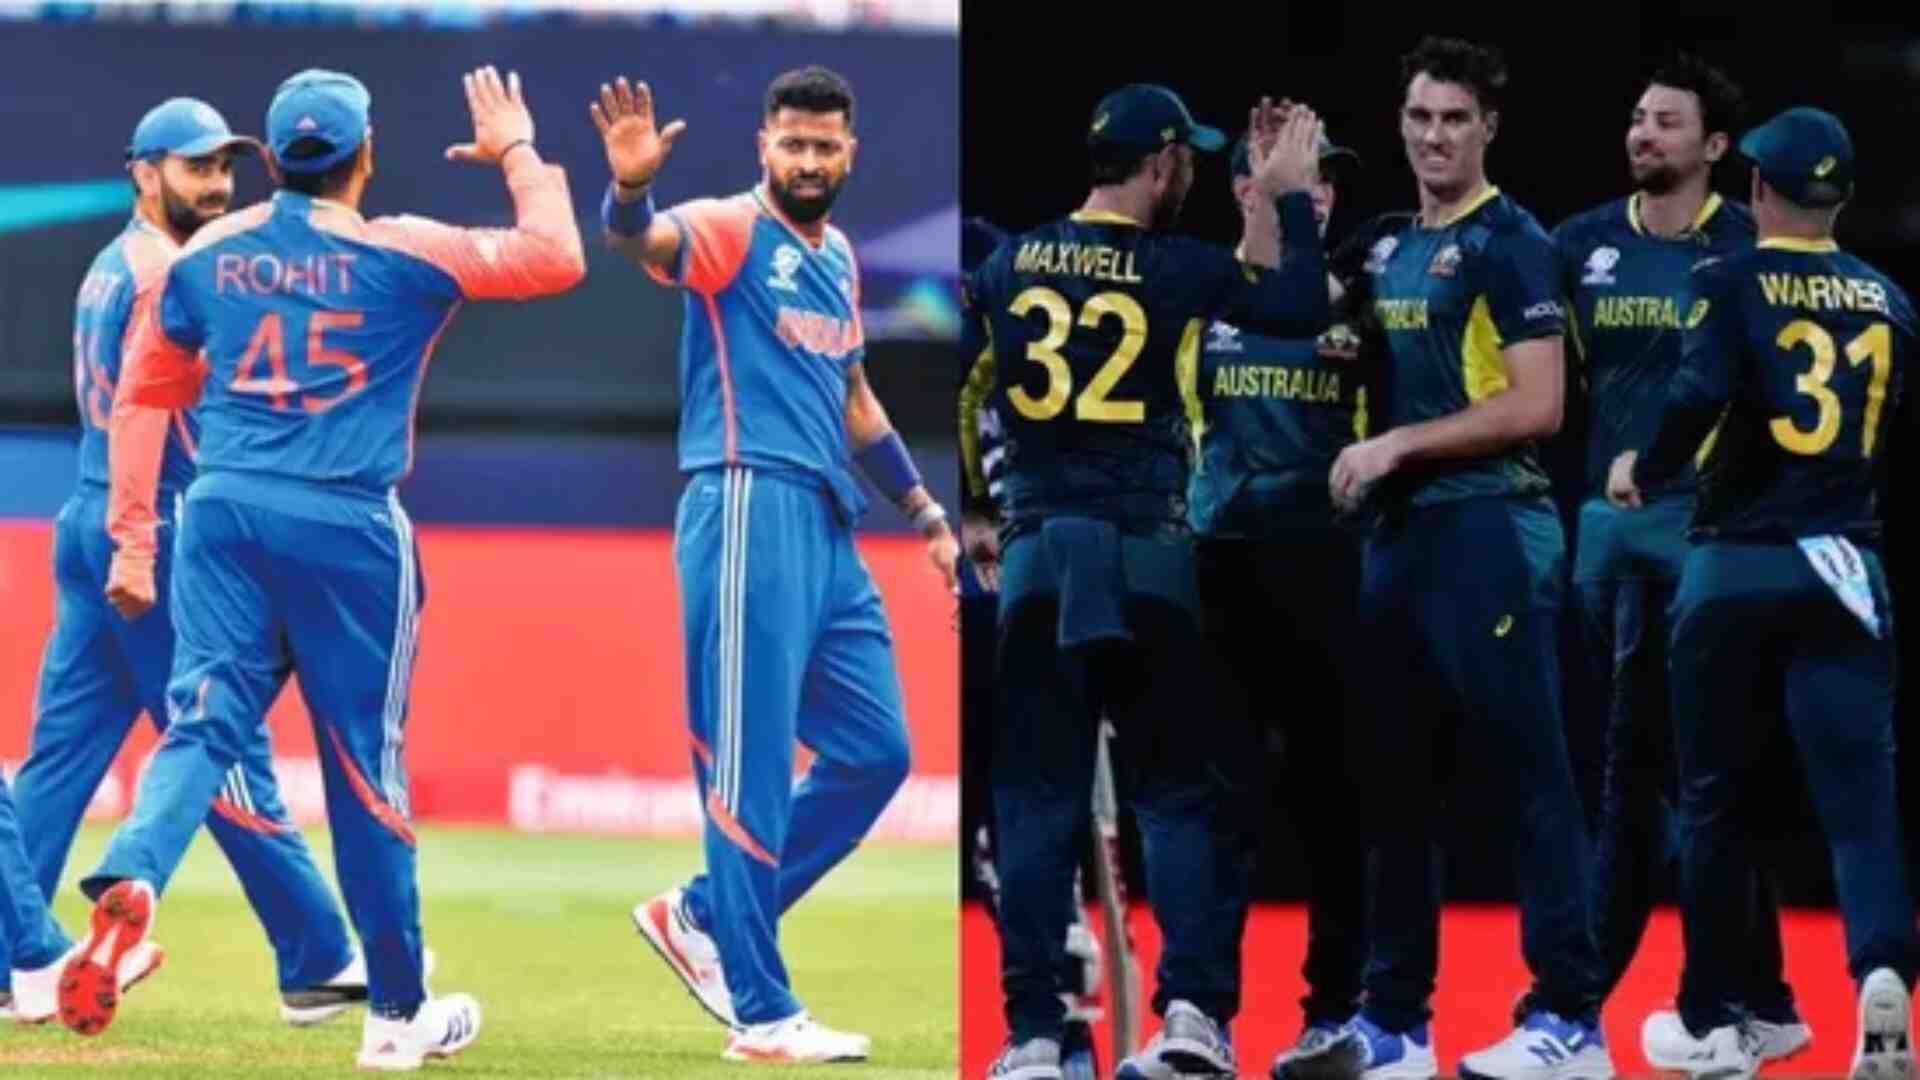 Is India v/s Australia Match Pre-Planned? T20 World Cup Seeding Explains